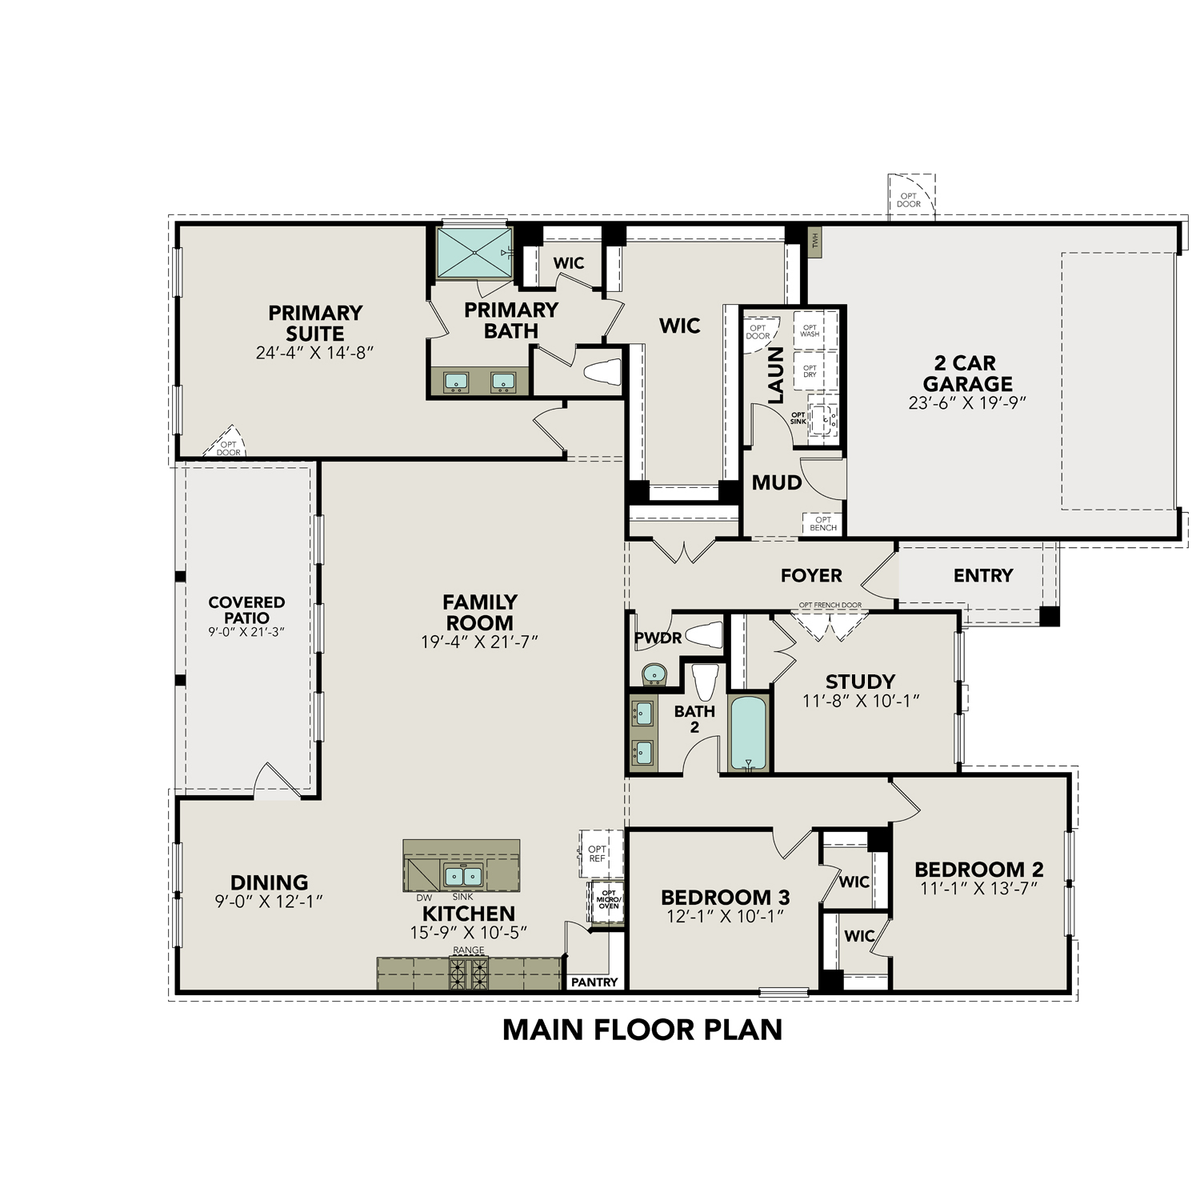 1 - The Rockford E floor plan layout for 14458 Verde Azul in Davidson Homes' Ladera community.